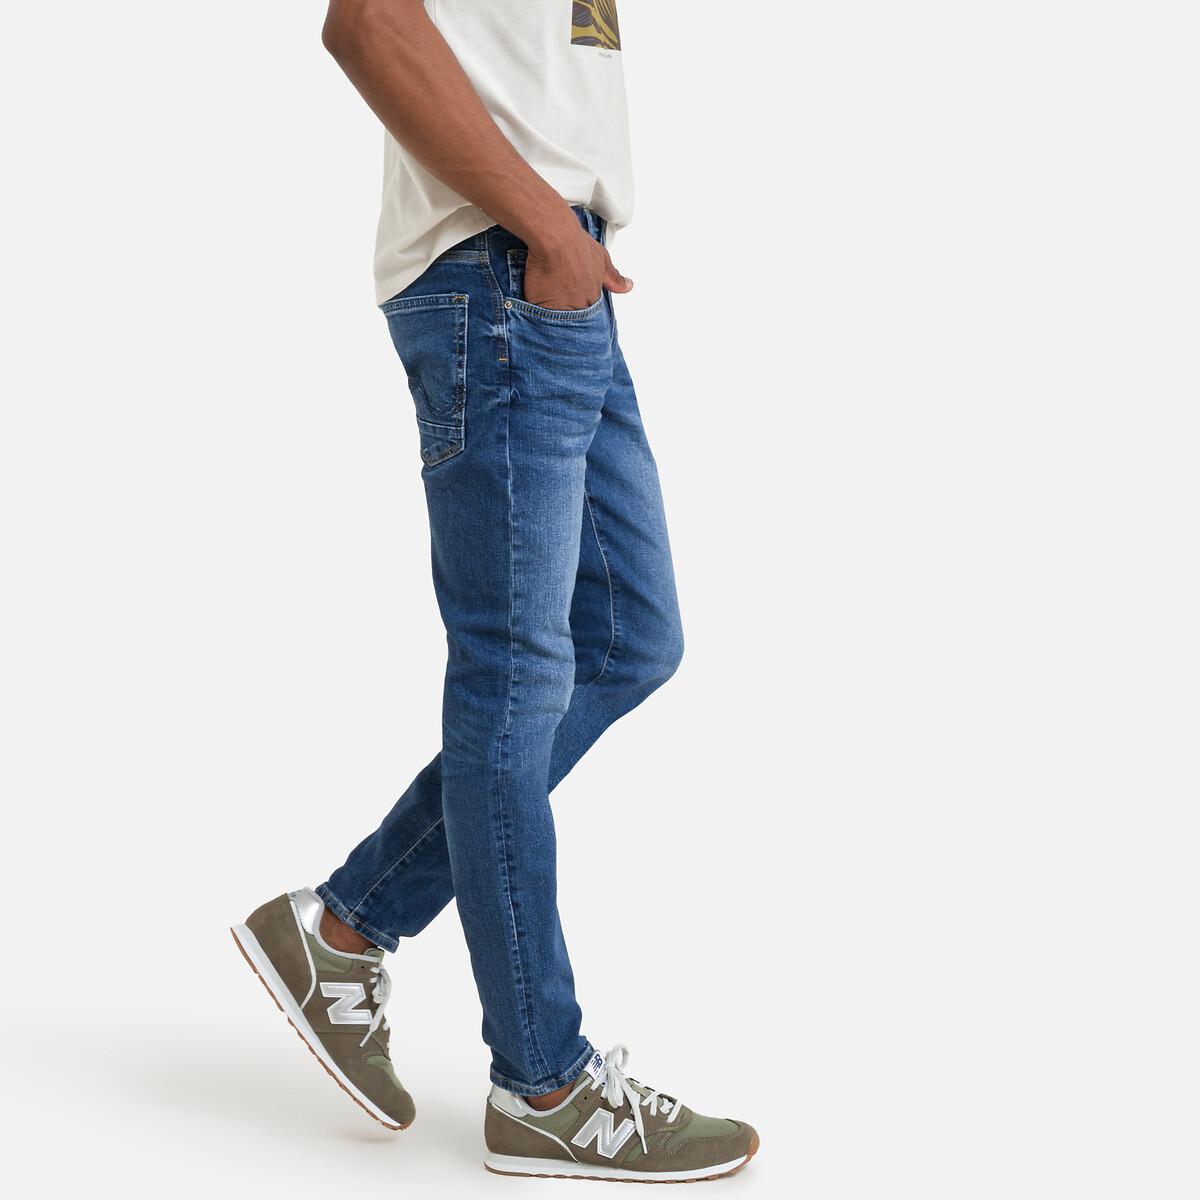 seaham mid jeans rise stretch Redoute and in | Supreme Petrol Industries fit slim La